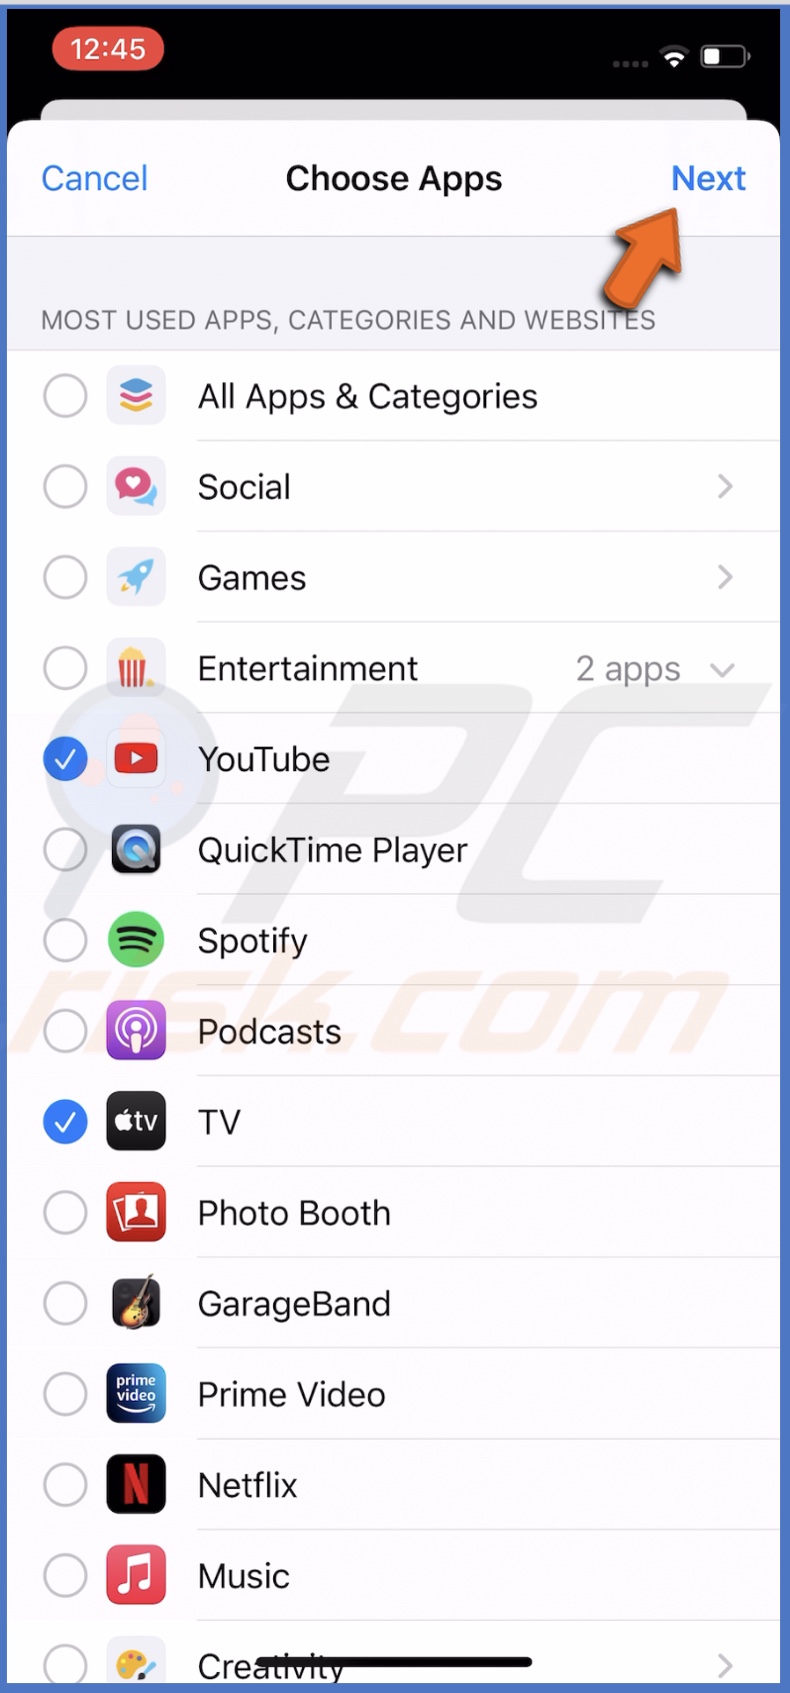 Choose apps to set a limit in iOS